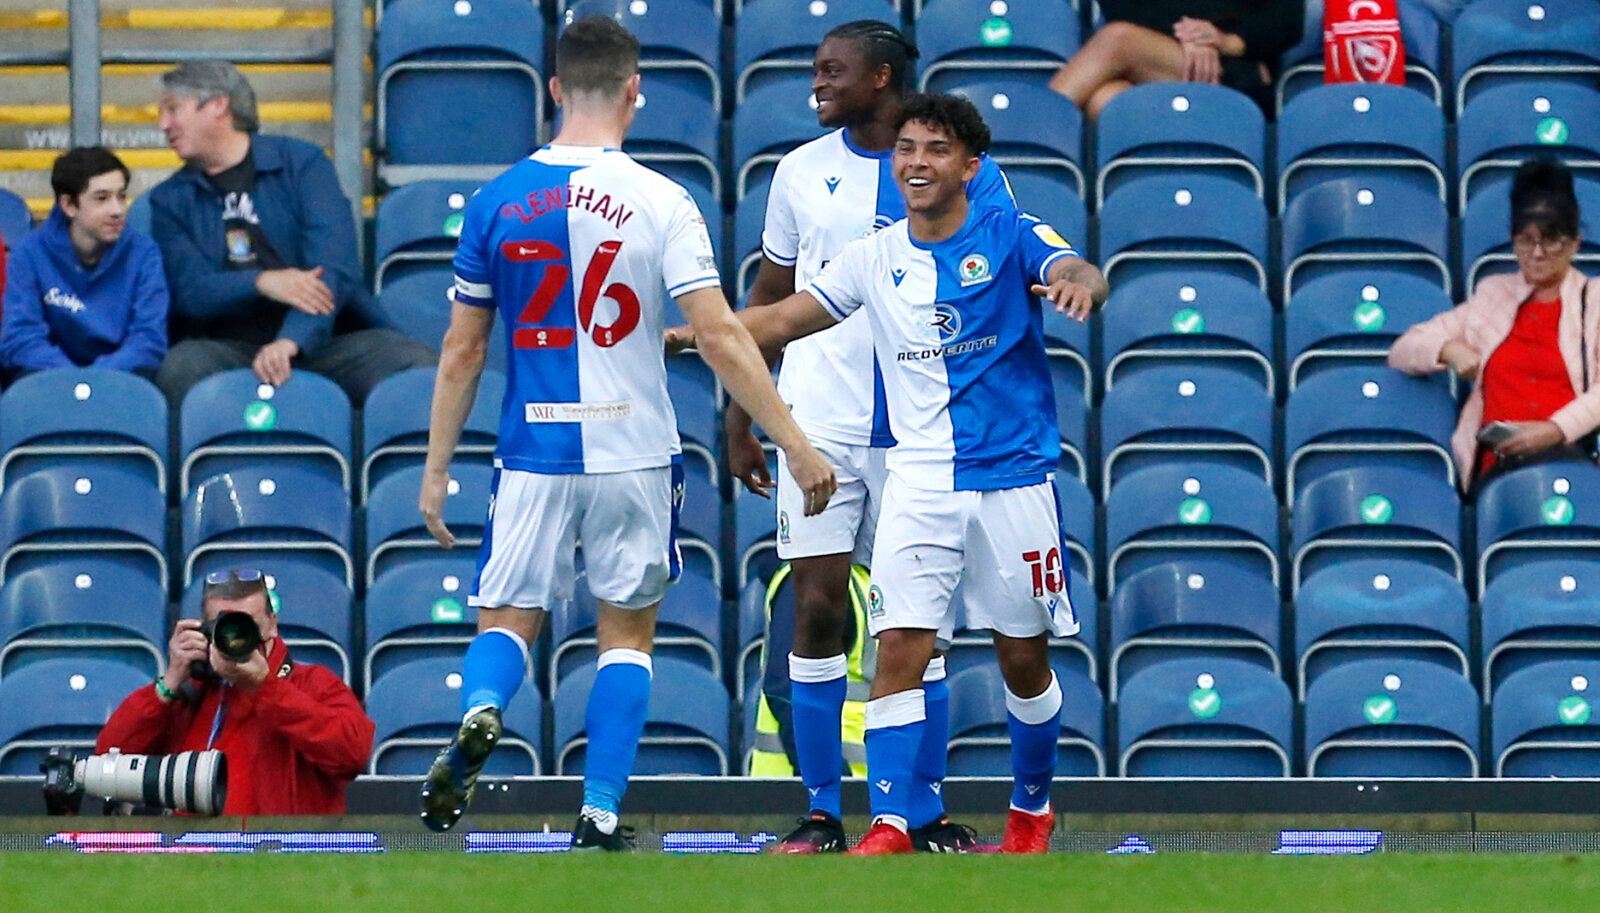 Soccer Football - Carabao Cup - First Round - Blackburn Rovers v Morecambe - Ewood Park, Blackburn, Britain - August 10, 2021 Blackburn Rovers' Tyrhys Dolan celebrates scoring their first goal with teammates Action Images/Craig Brough EDITORIAL USE ONLY. No use with unauthorized audio, video, data, fixture lists, club/league logos or 'live' services. Online in-match use limited to 75 images, no video emulation. No use in betting, games or single club /league/player publications.  Please contact 